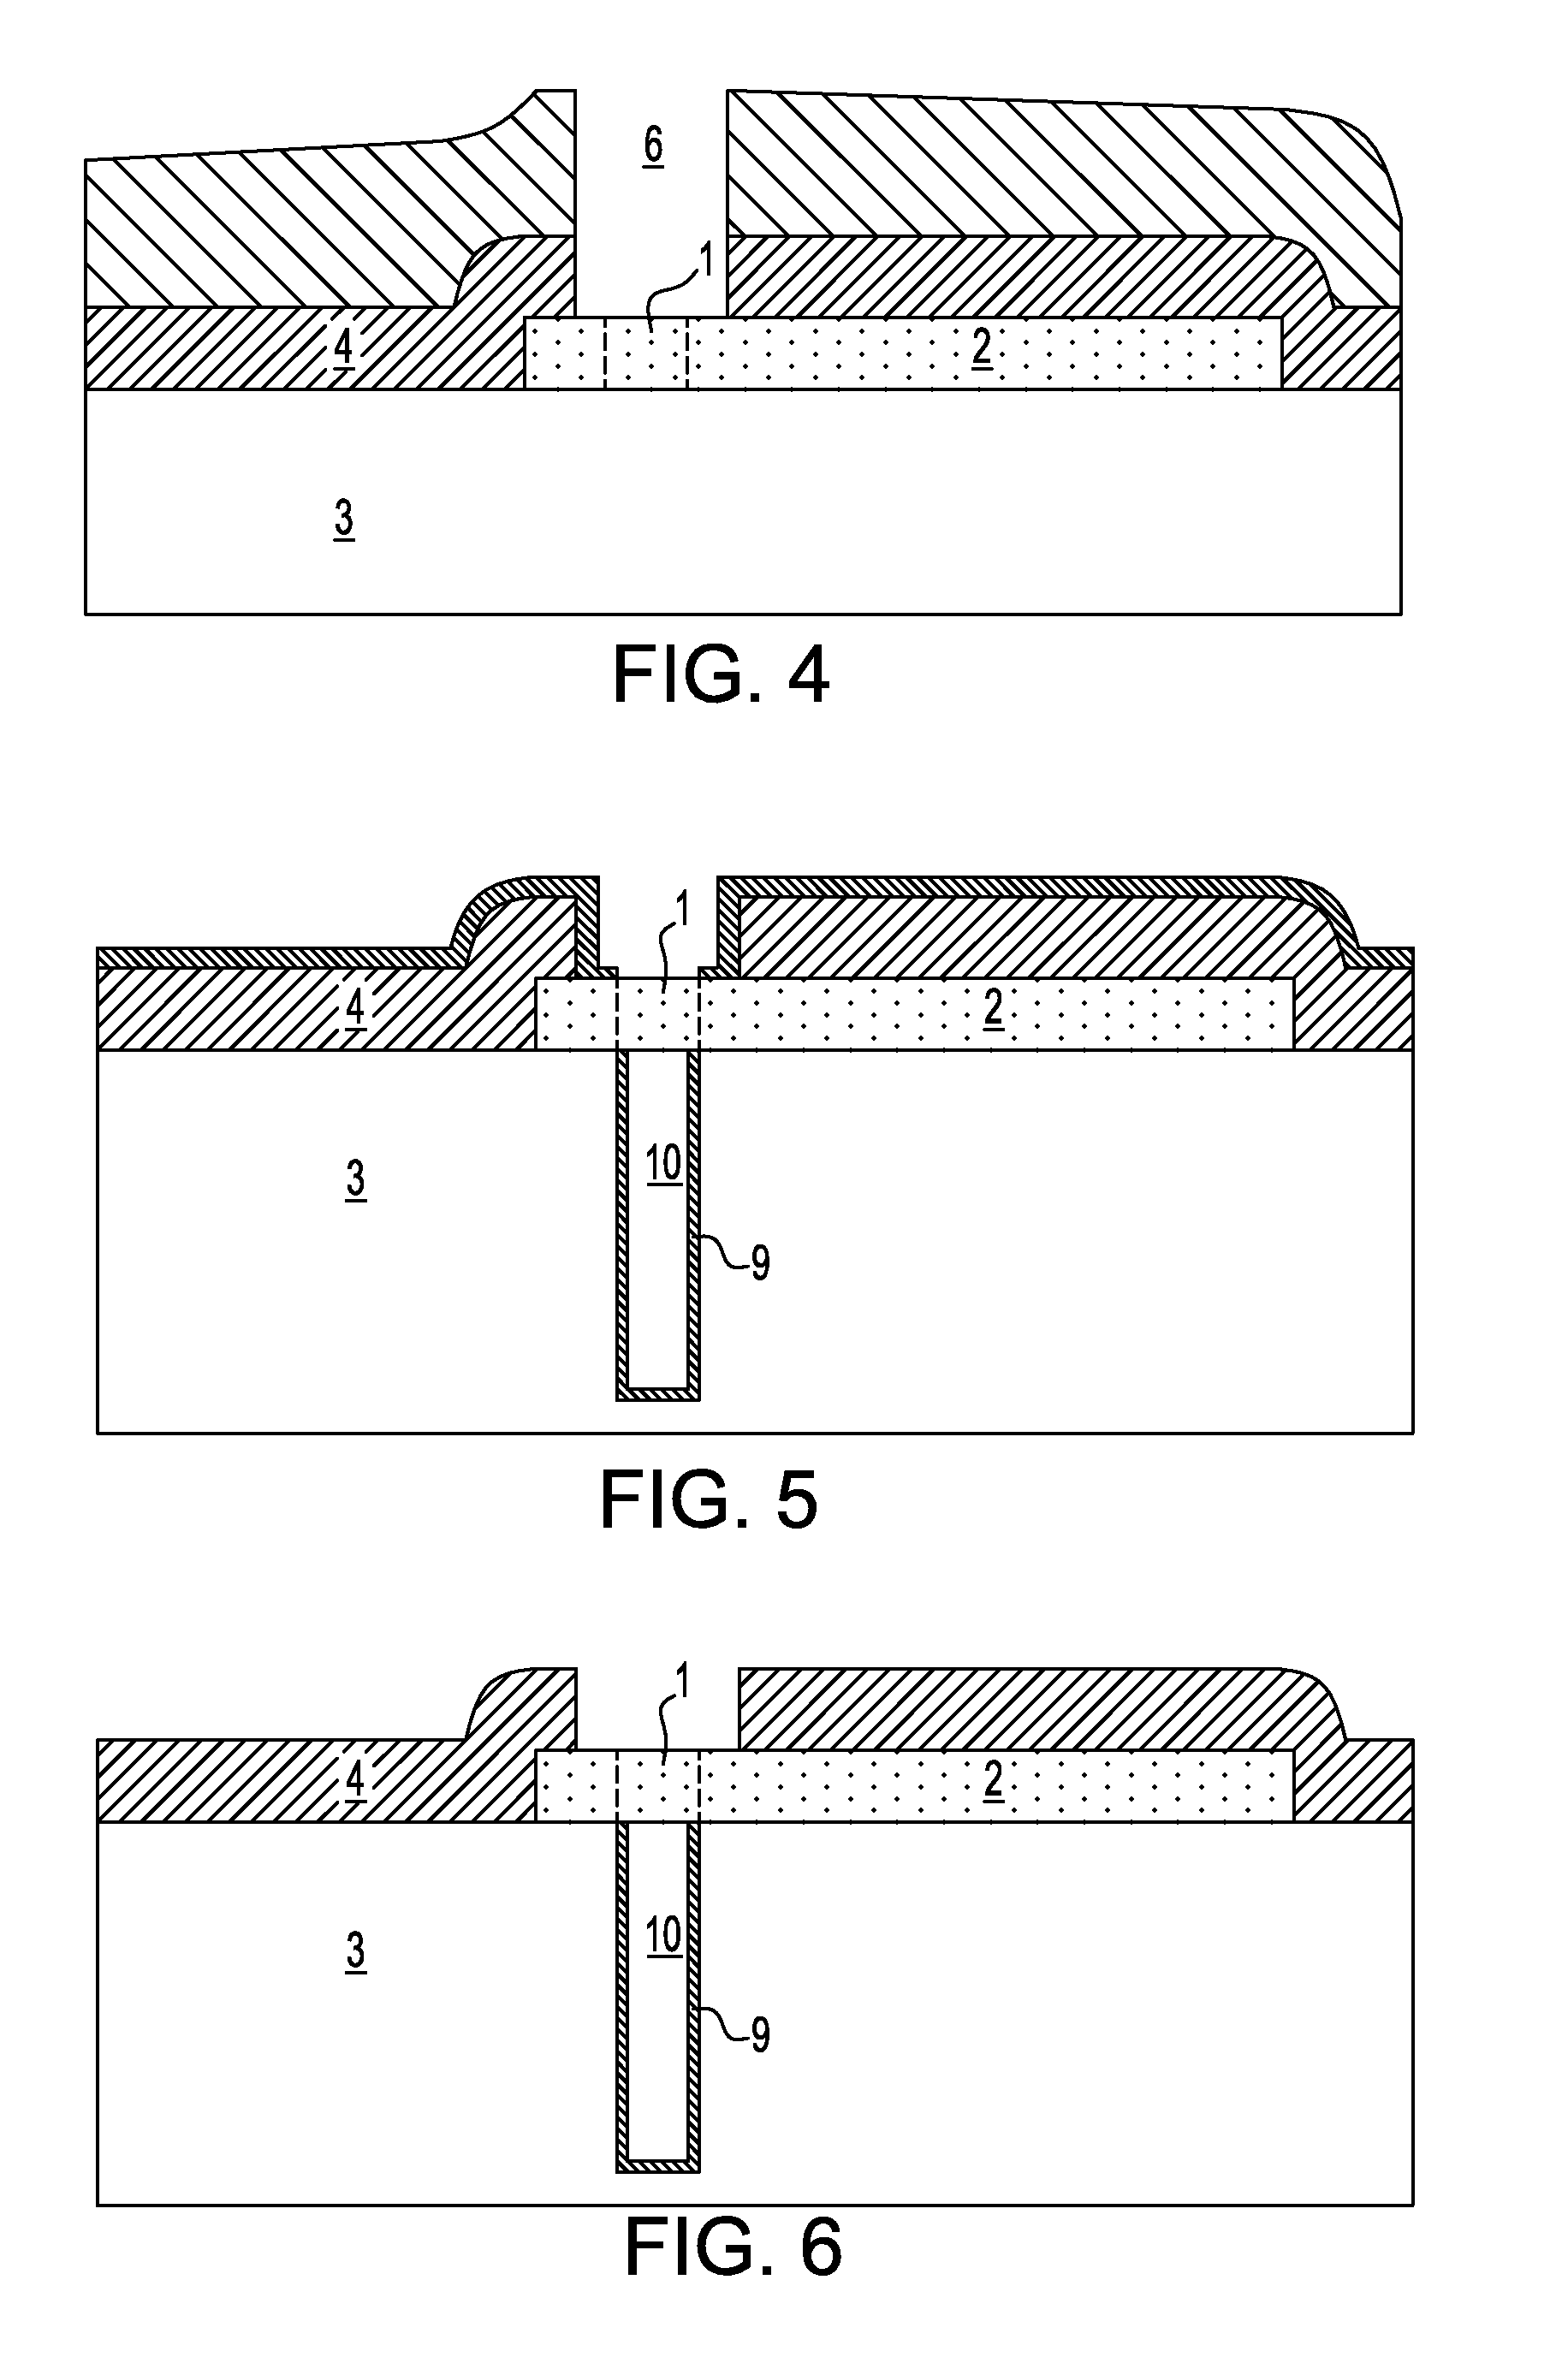 Semiconductor Device Using An Aluminum Interconnect To Form Through-Silicon Vias